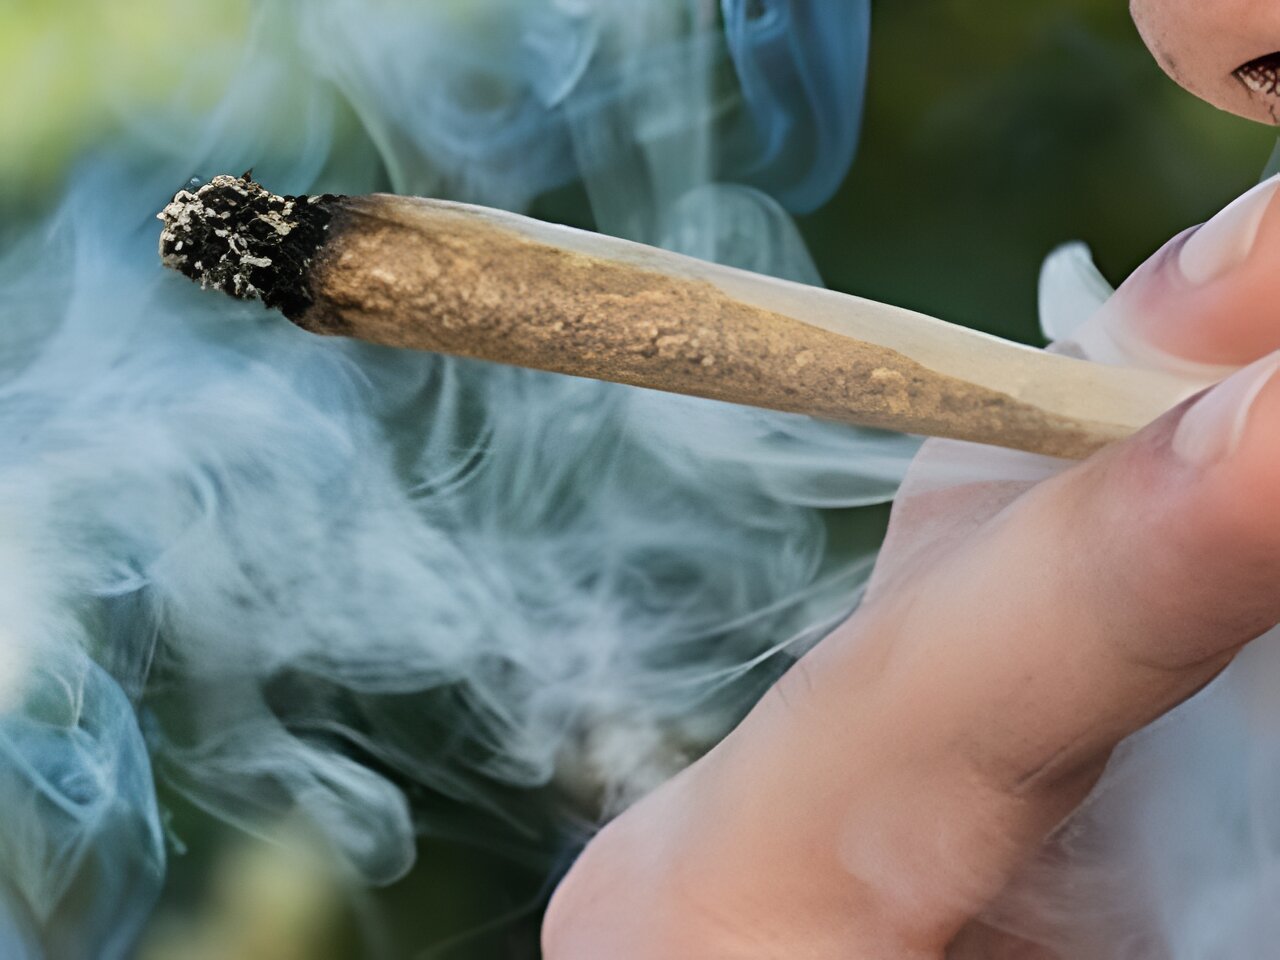 More Americans than ever believe marijuana smoke is safer than cigarette  smoke, but they're wrong